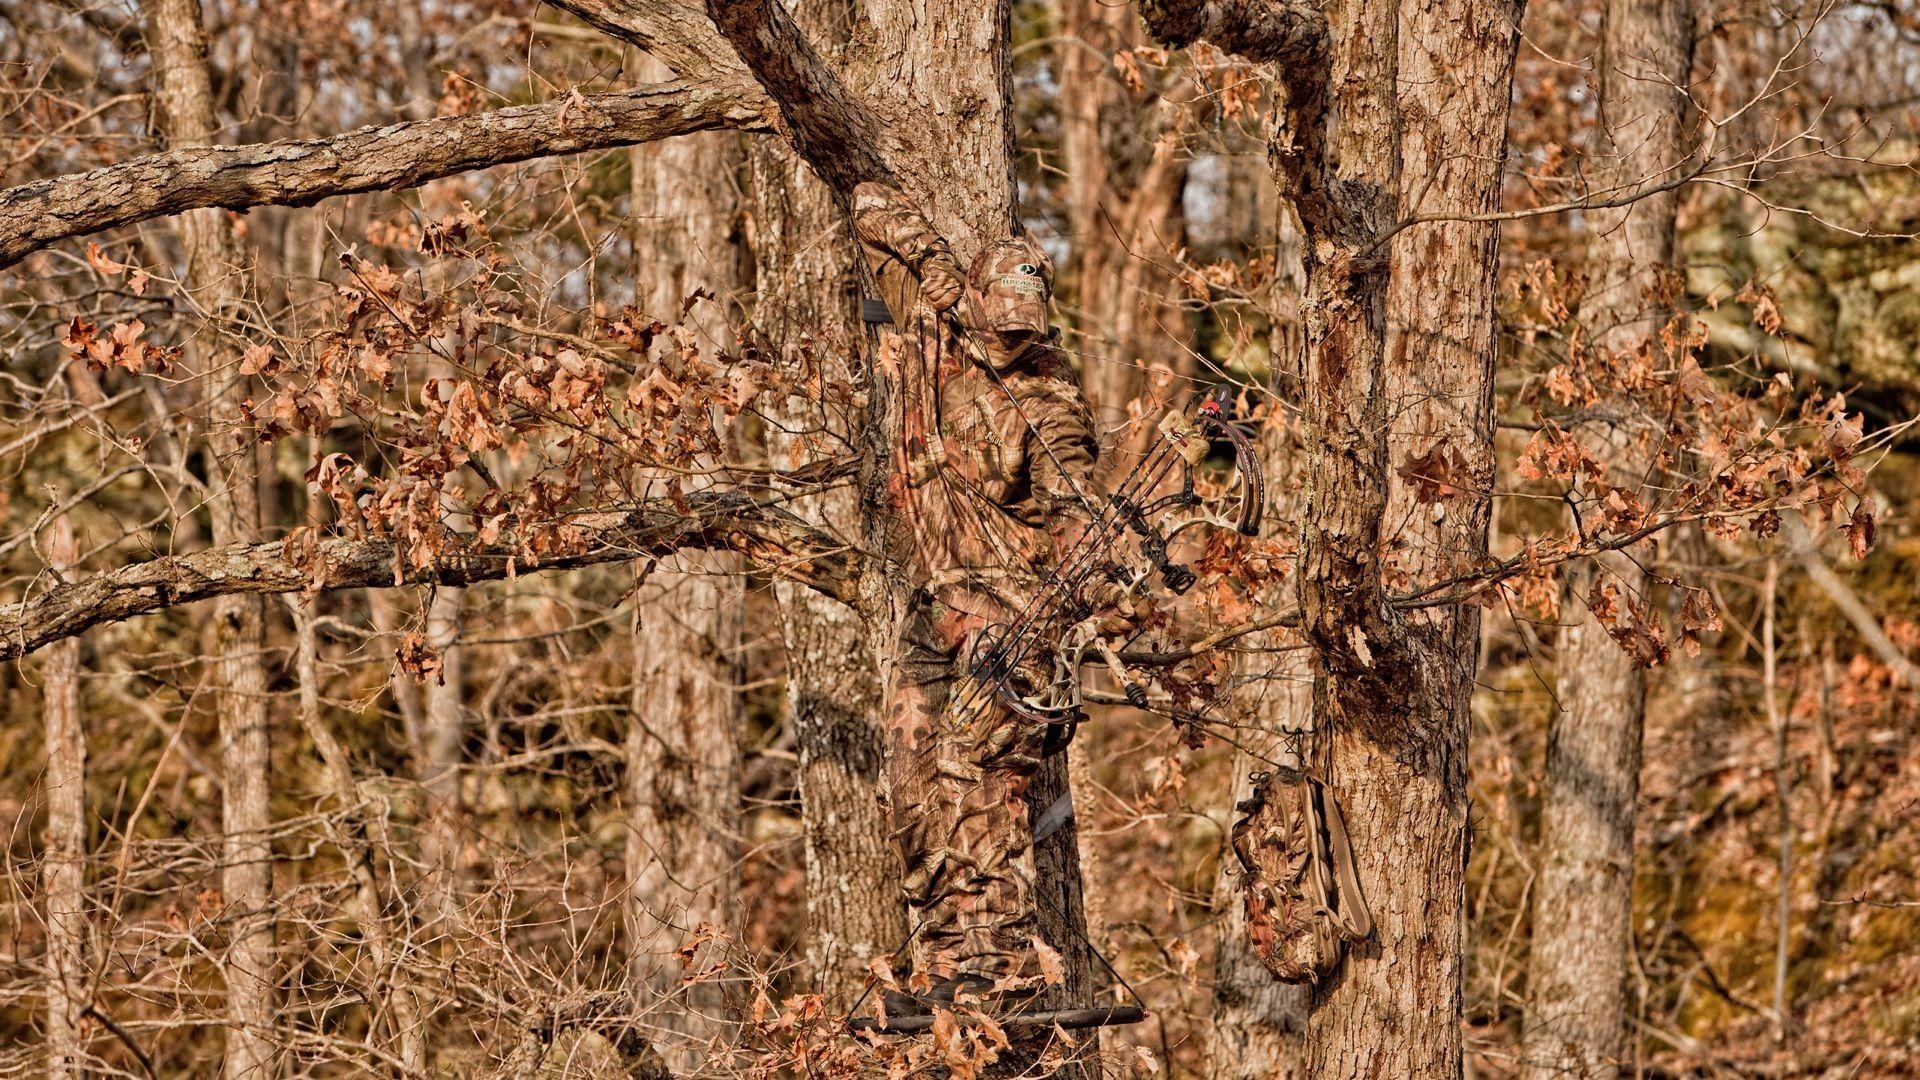 Realtree Max 5 Background